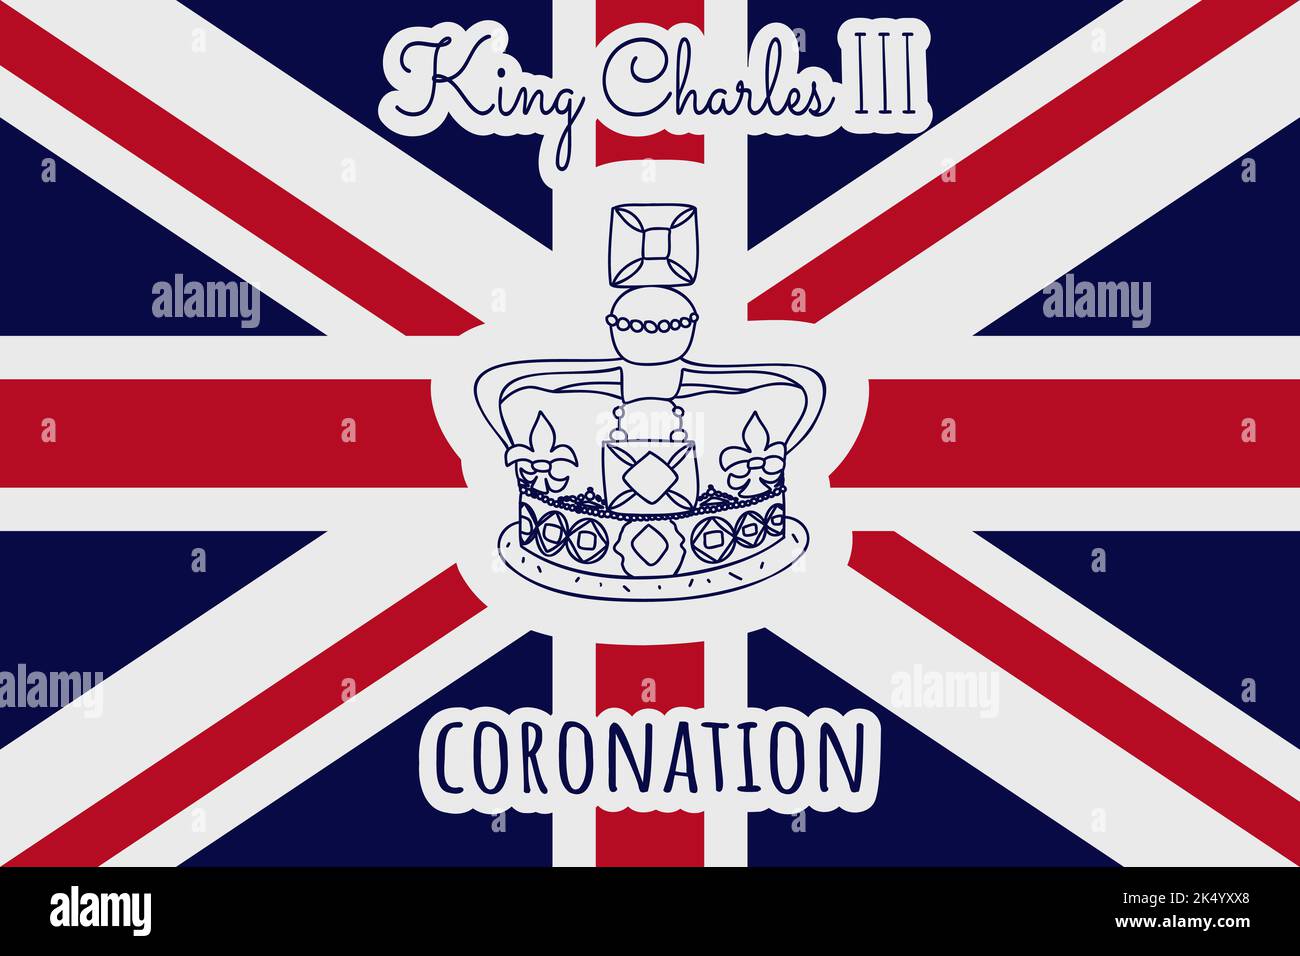 King Charles III Coronation text. Edwards crown. British flag background. Vector illustration Stock Vector